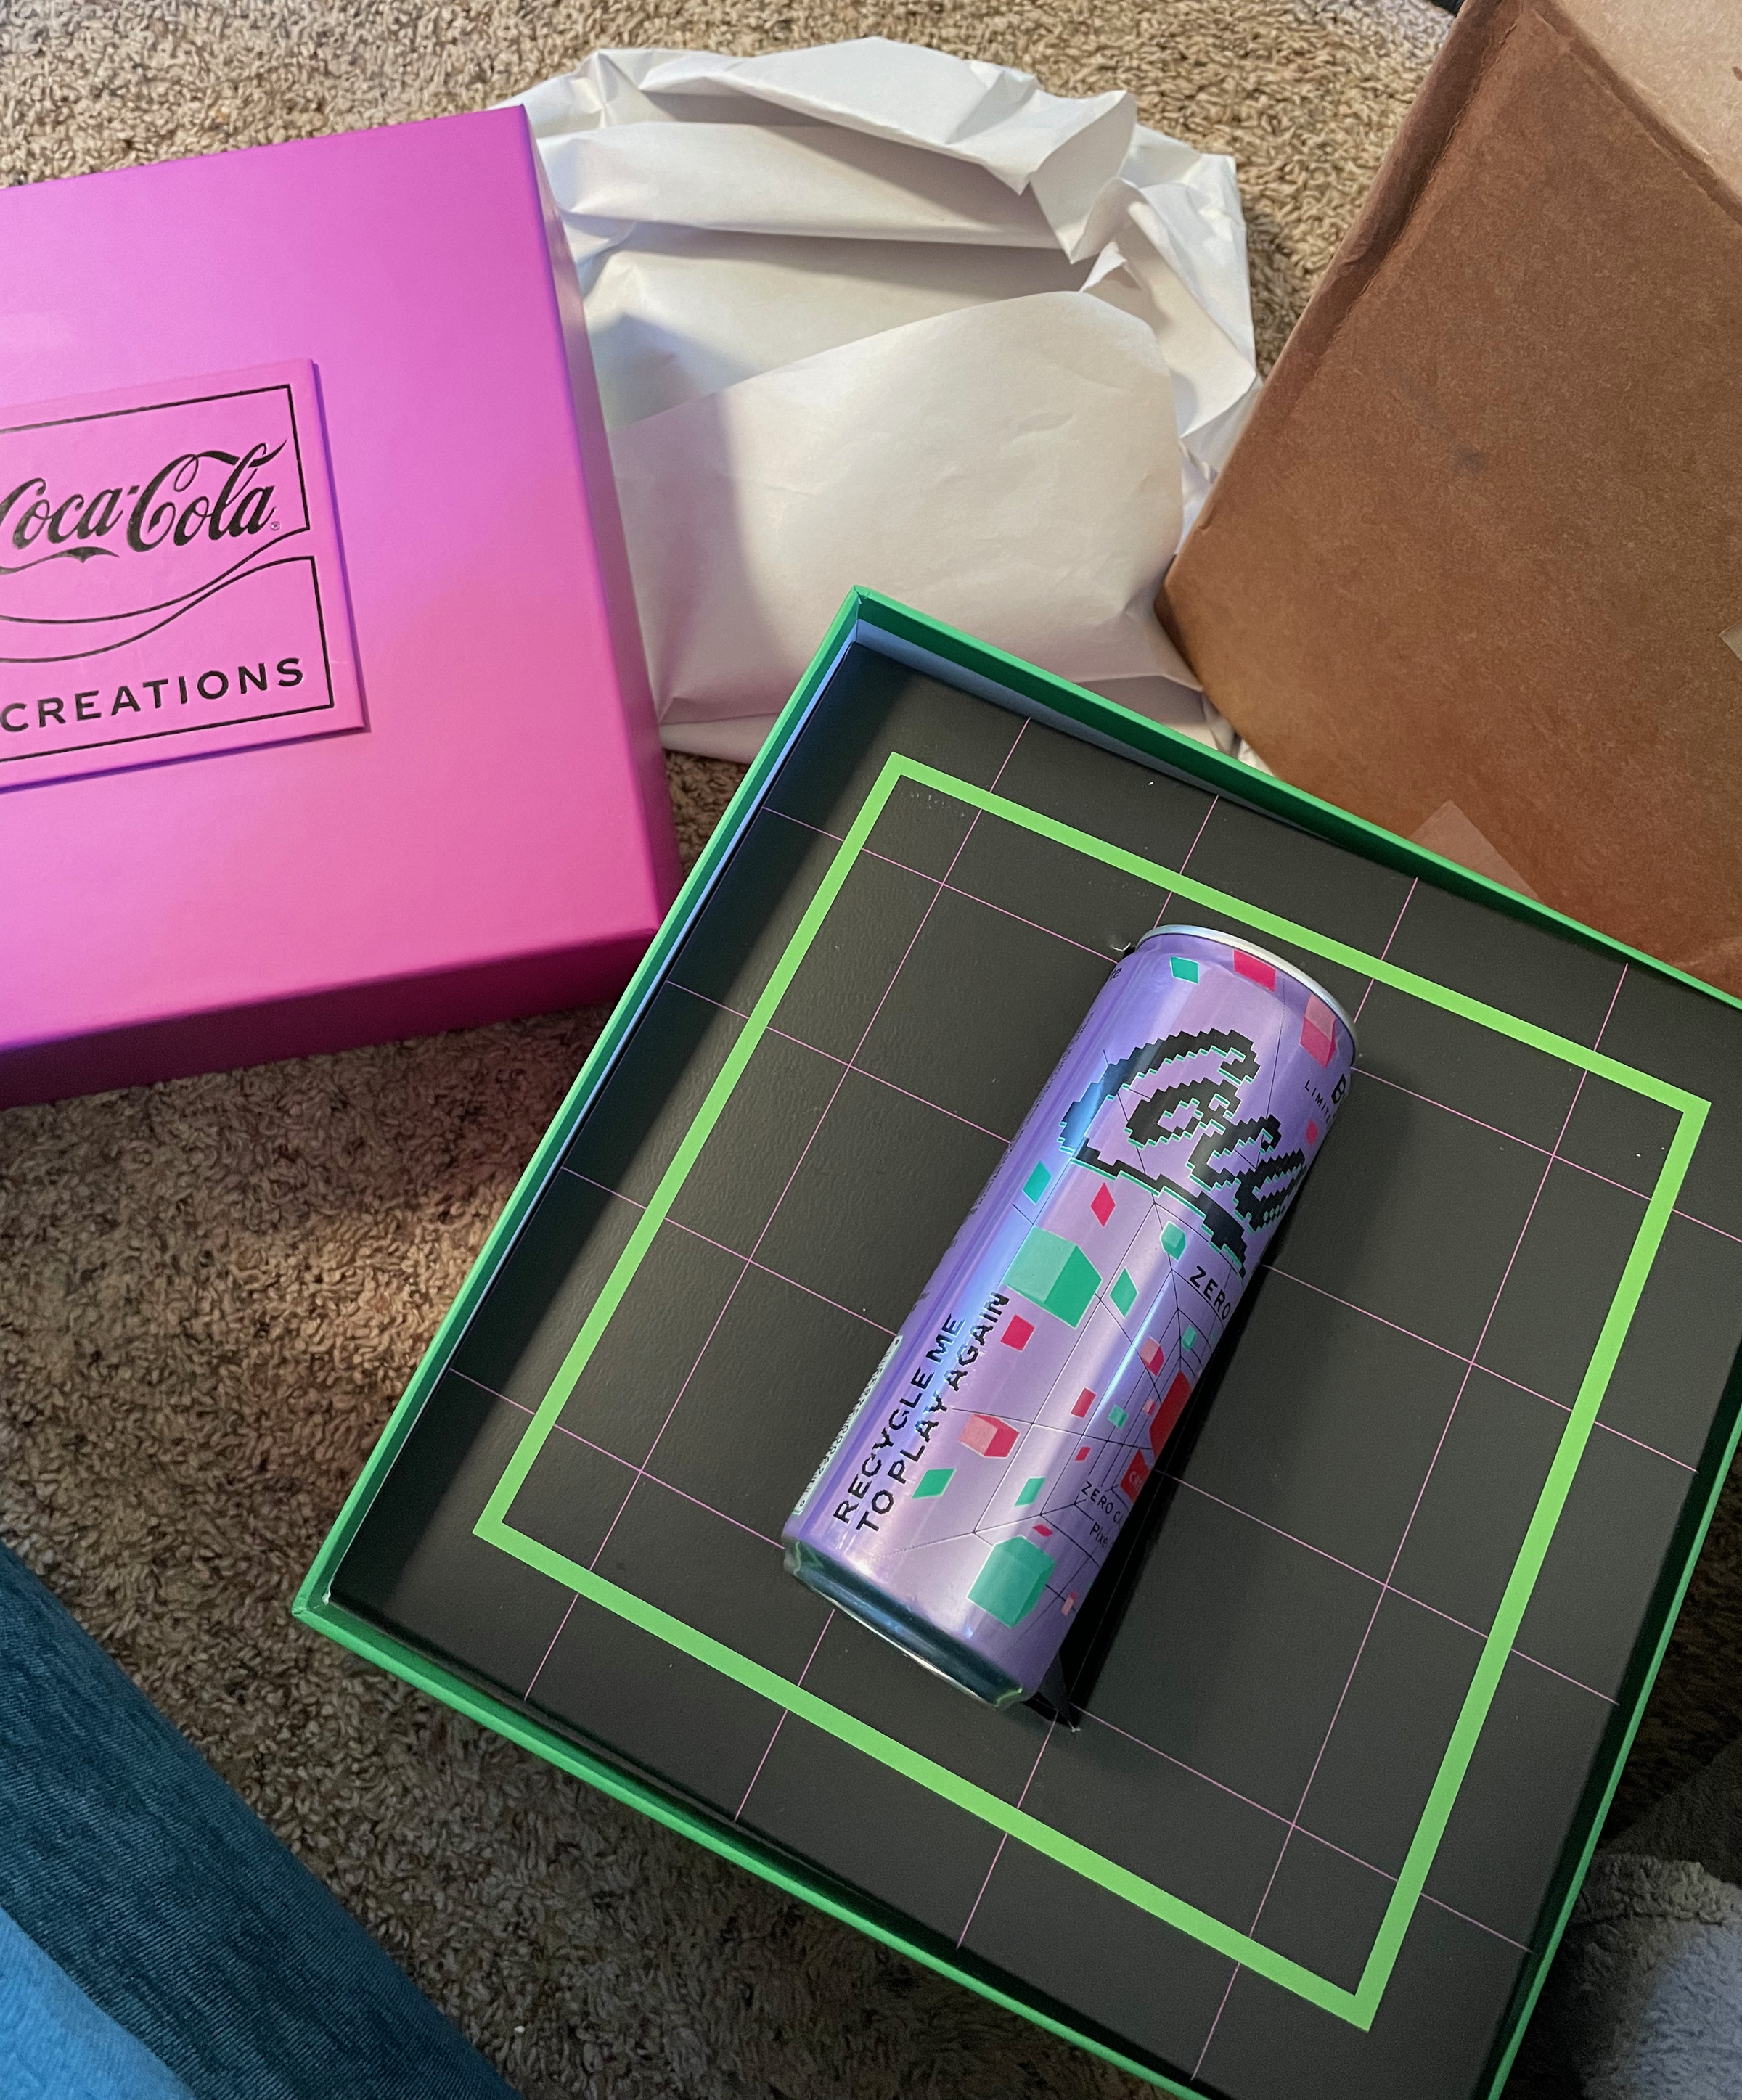 Image showing the Coke Byte can in its box.